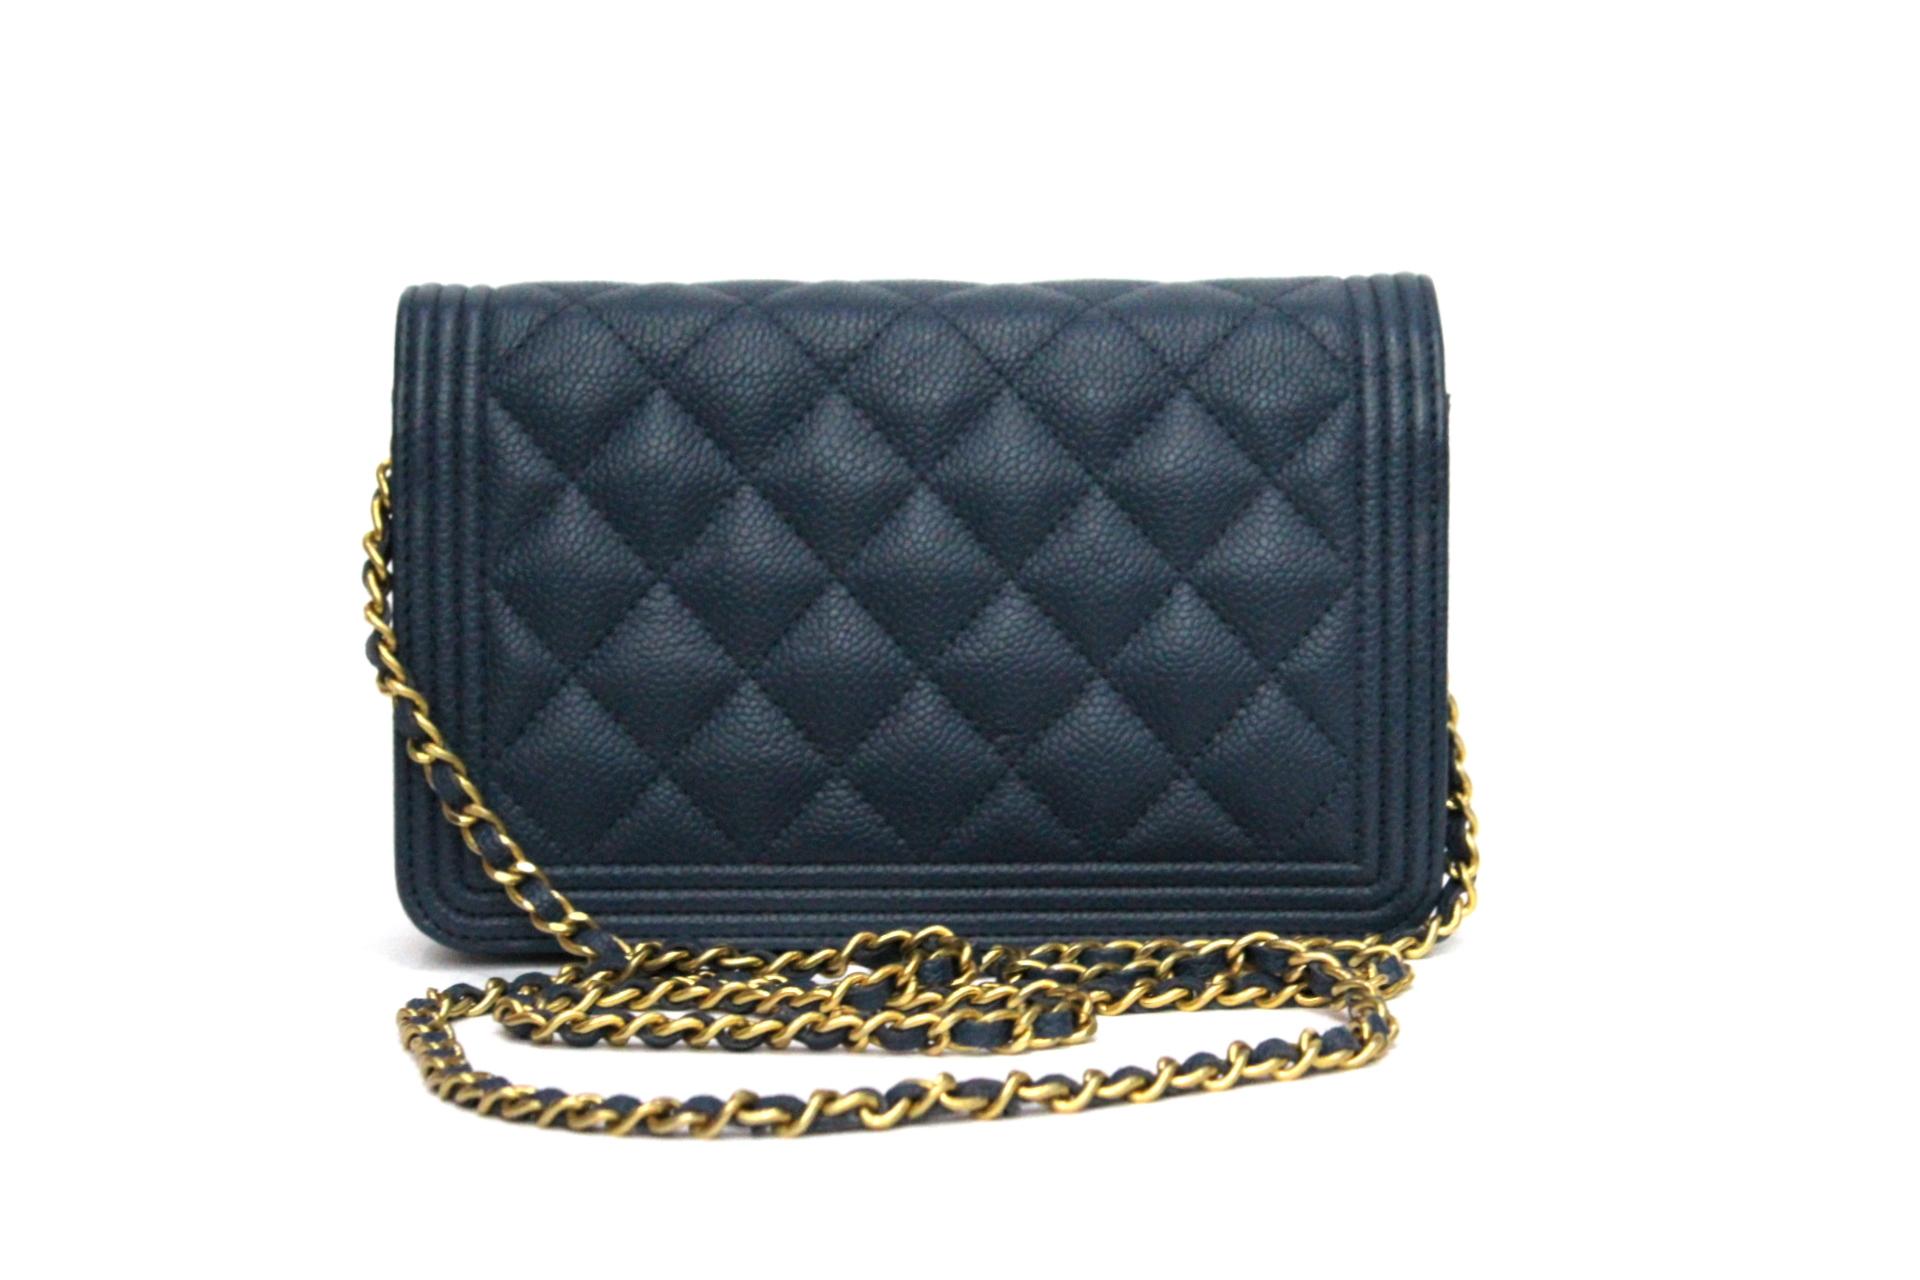 Chanel chain wallet or better known as WOC. Model of 2016, it is made in dark blue caviar and antique gold hardware. The bag is characterized by the classic fantasy of diamonds. Internally it is divided into two compartments, one with a zipper for